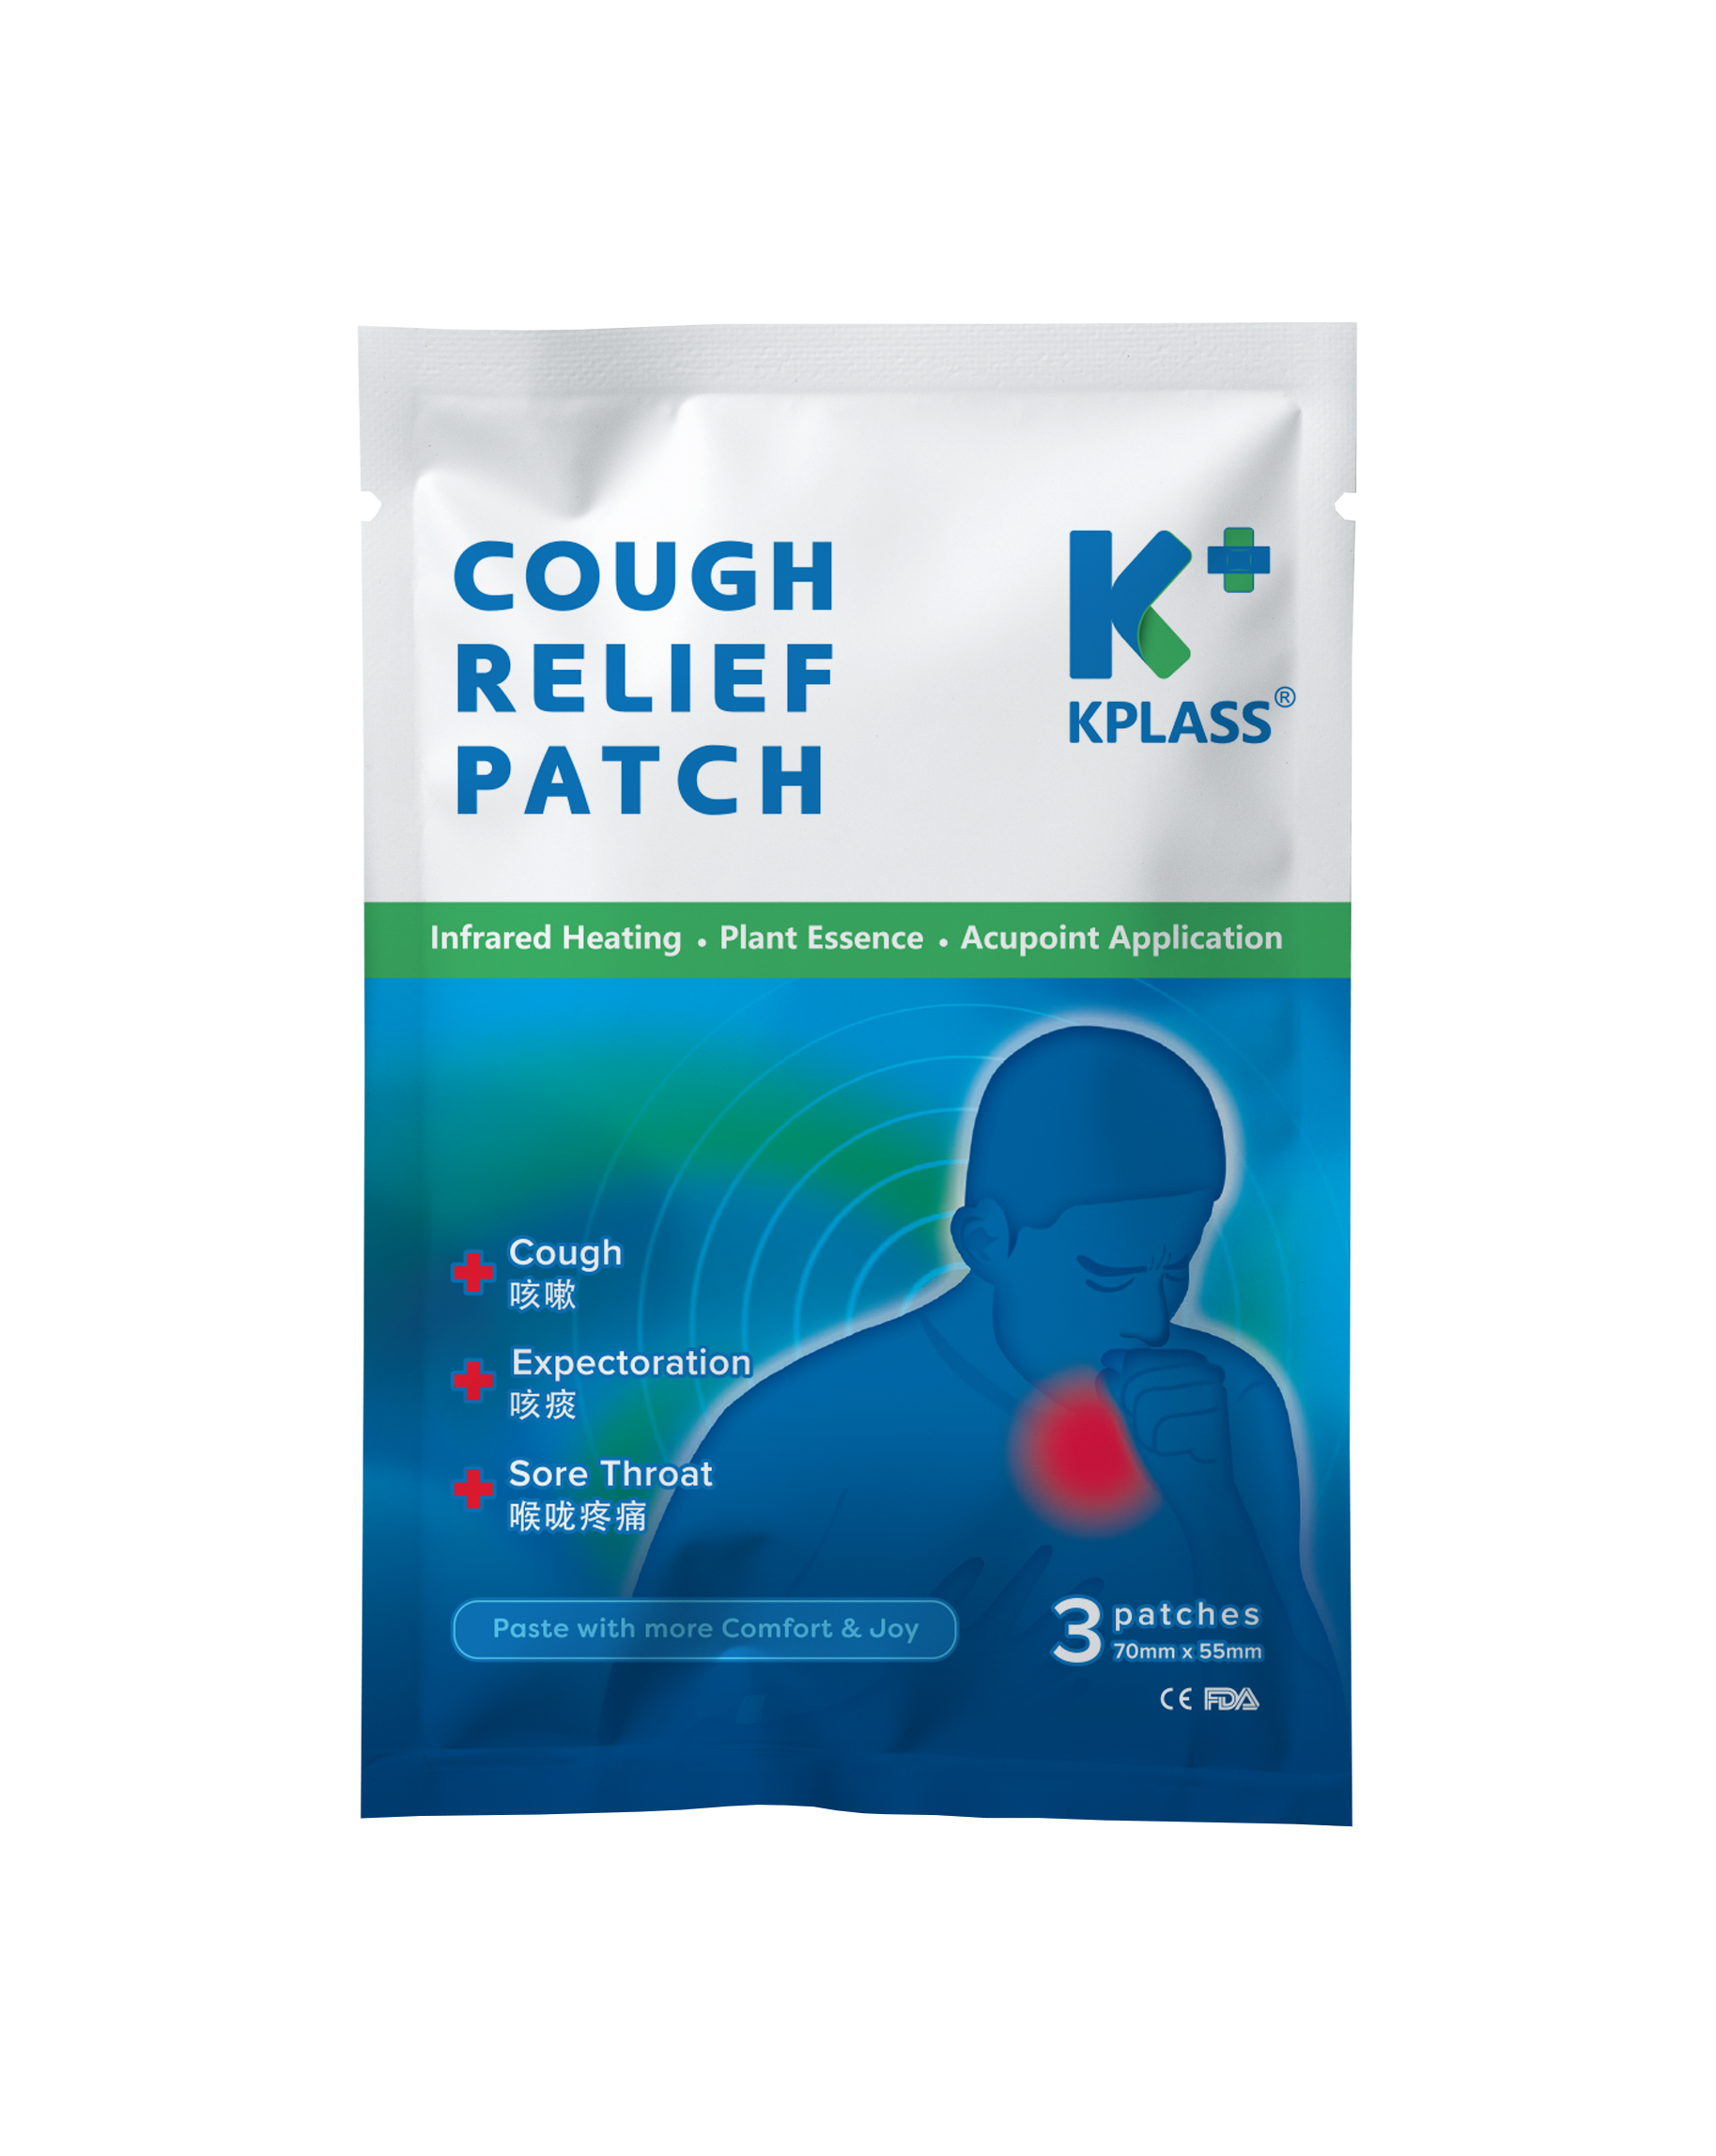 KPLASS Cough Relief Patch (3 Patches)